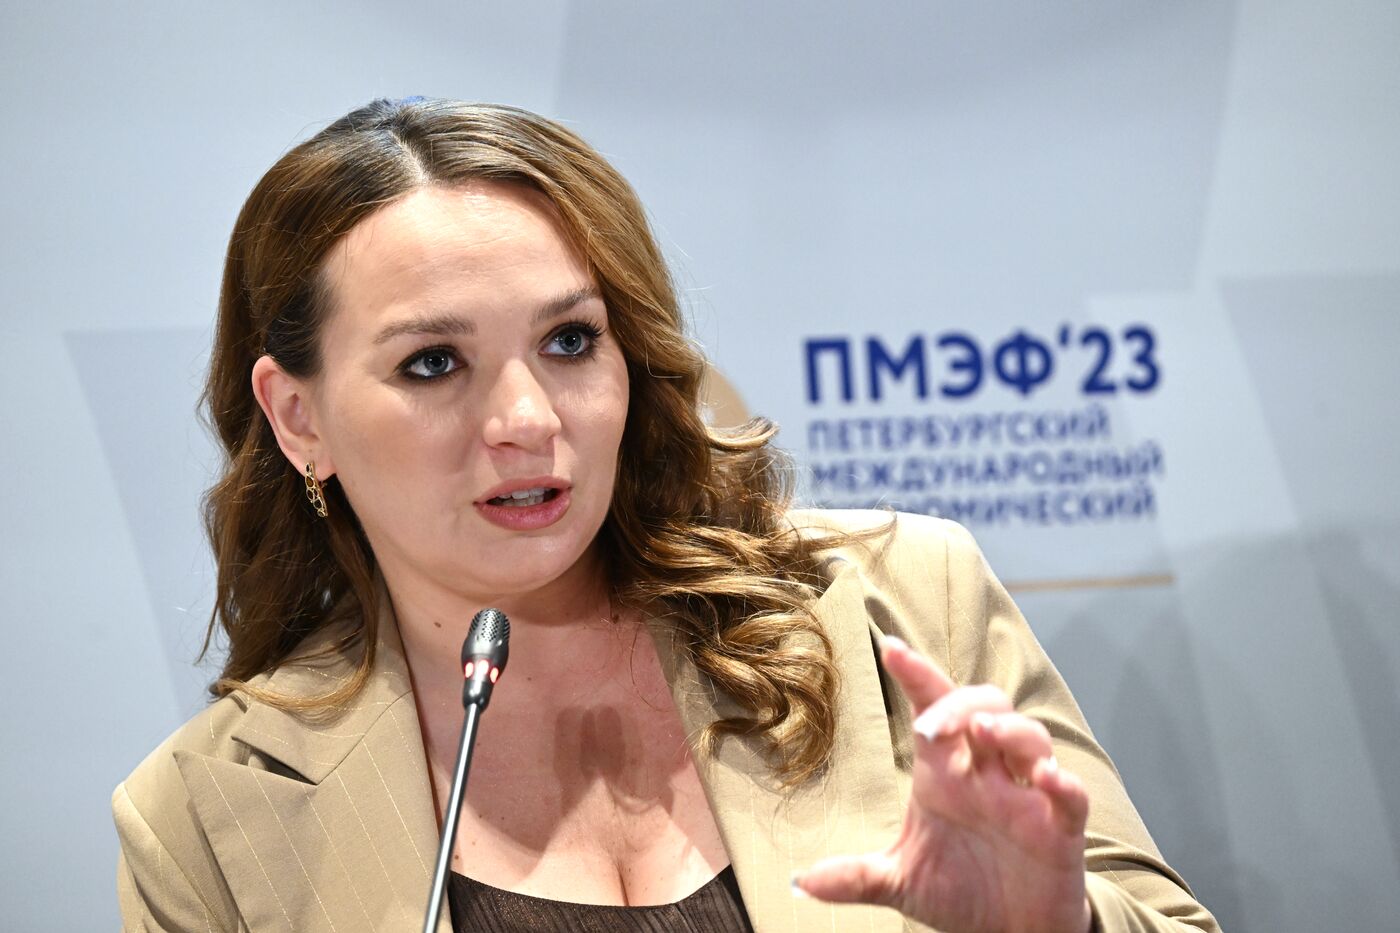 SPIEF-2023. Money Out of Thin Air: The Escalating Allure of Green Youth Entrepreneurship